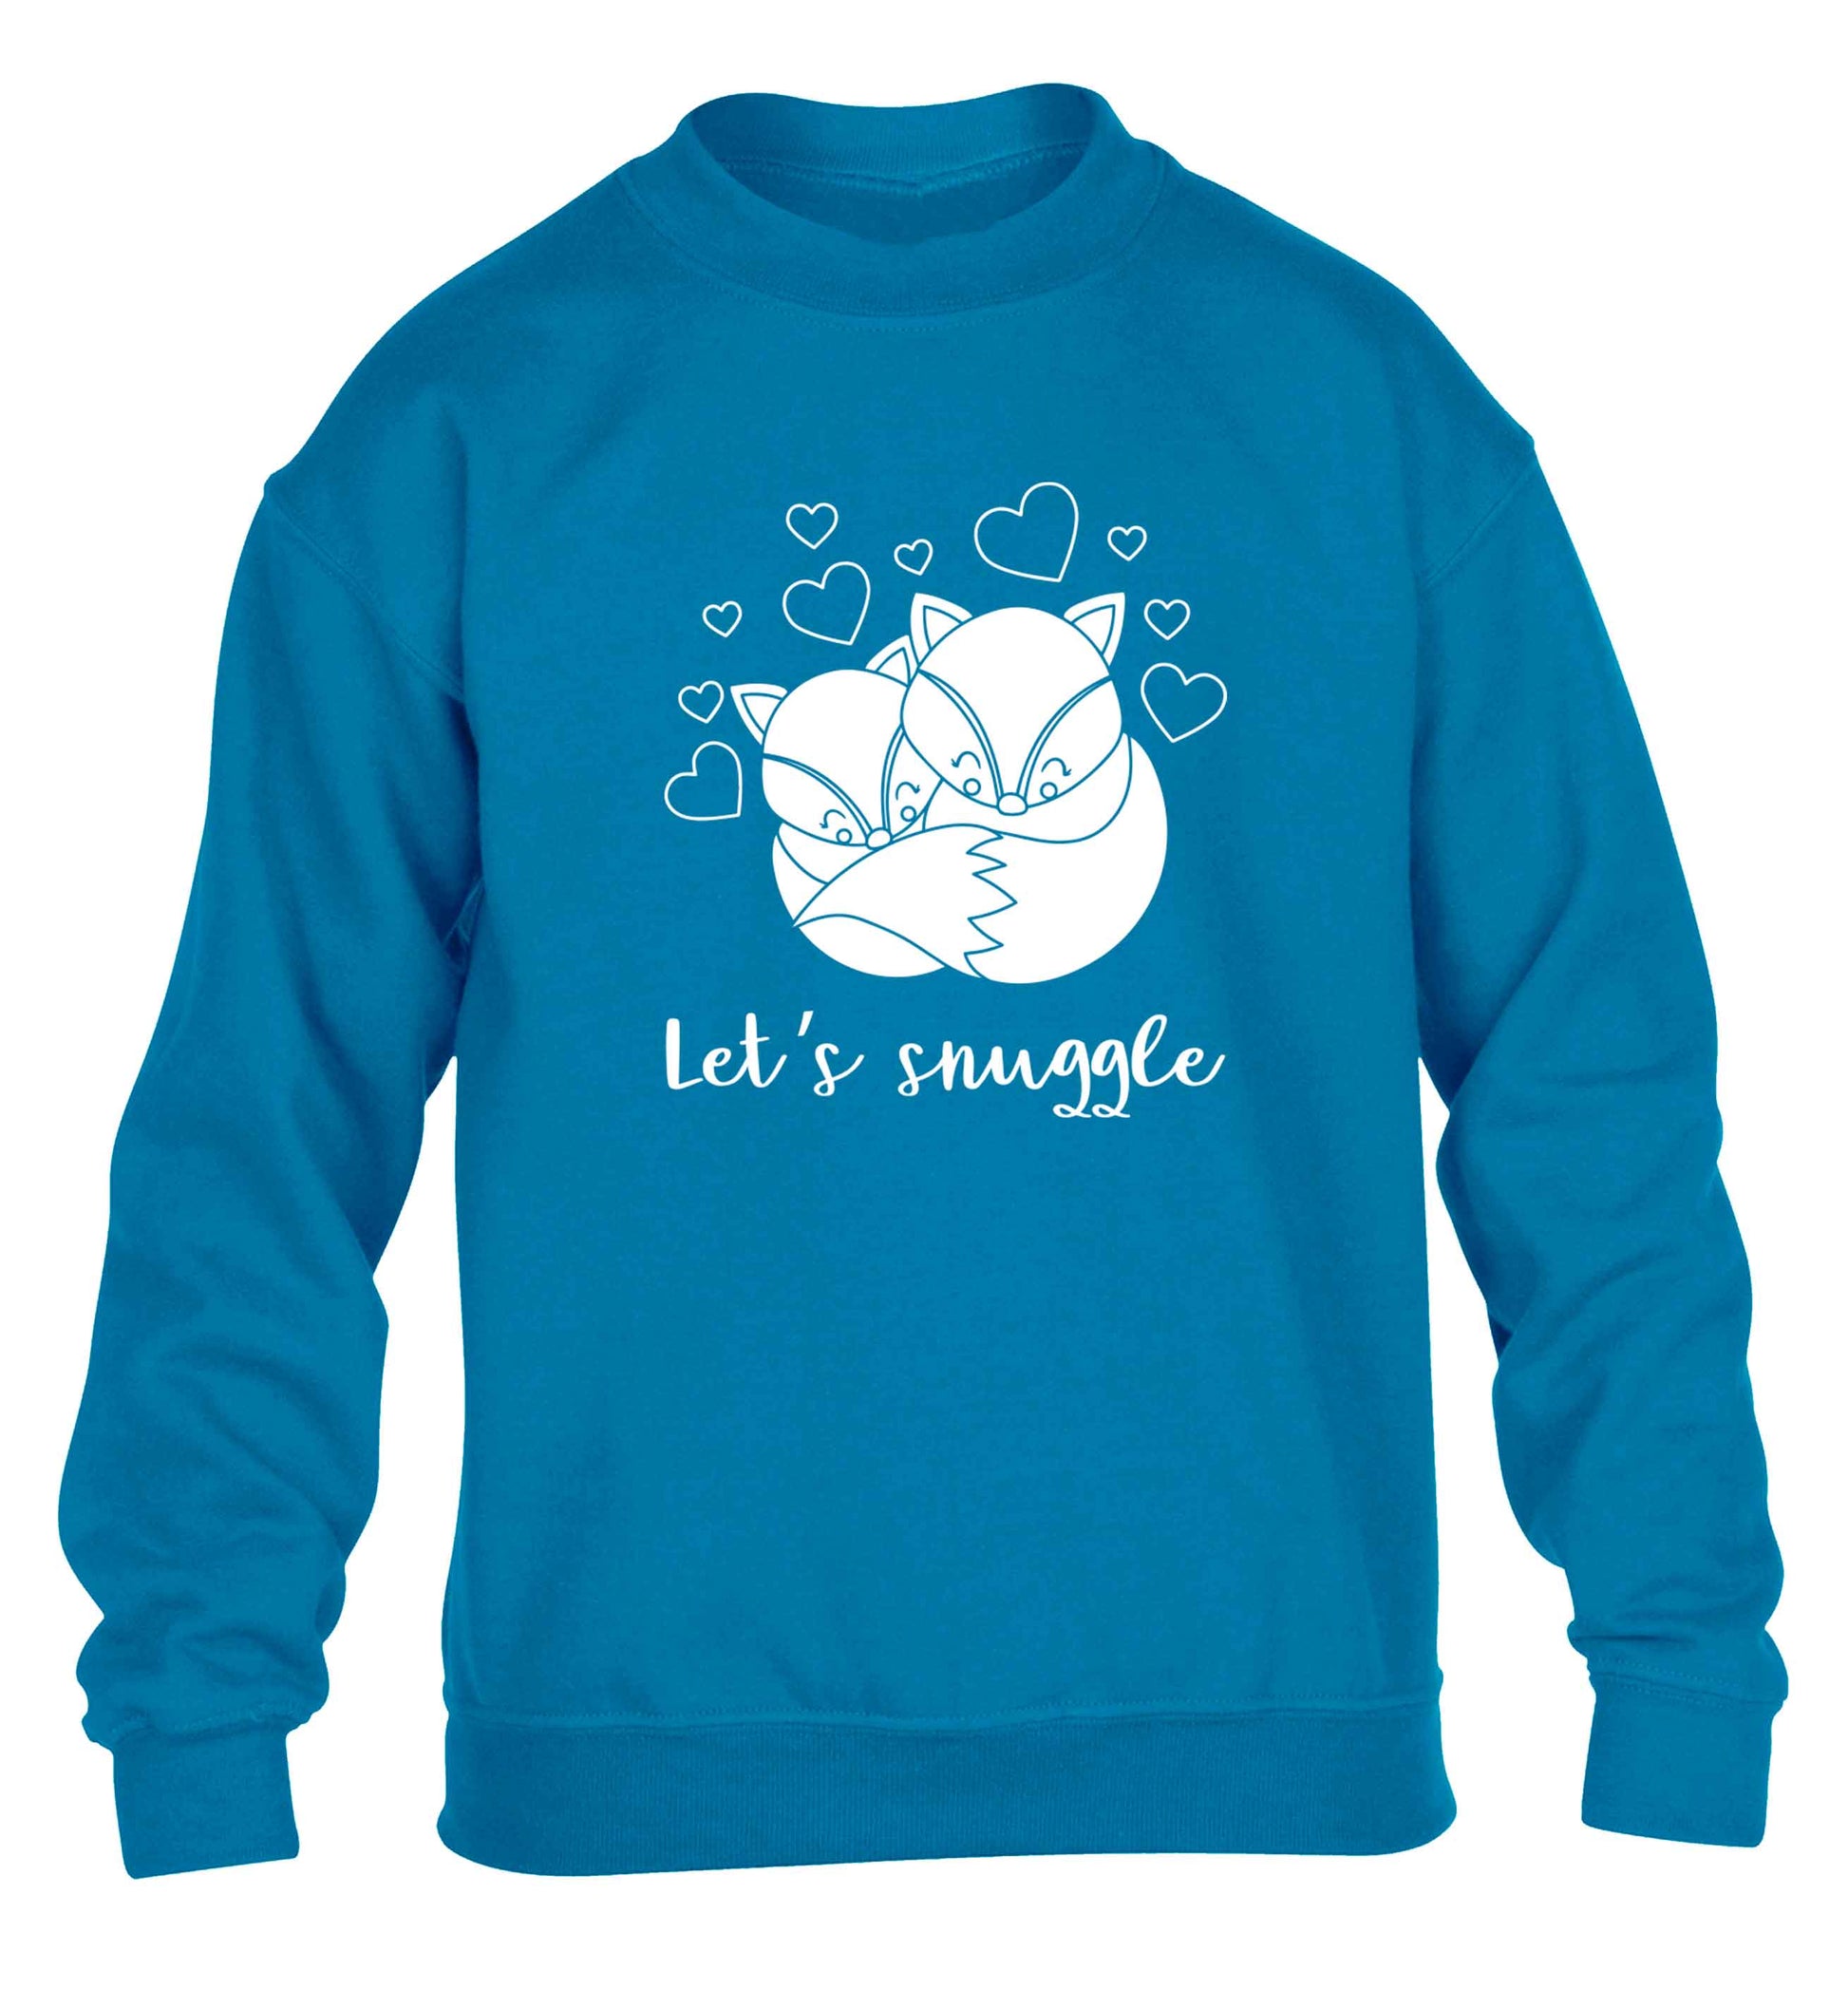 Let's snuggle children's blue sweater 12-13 Years